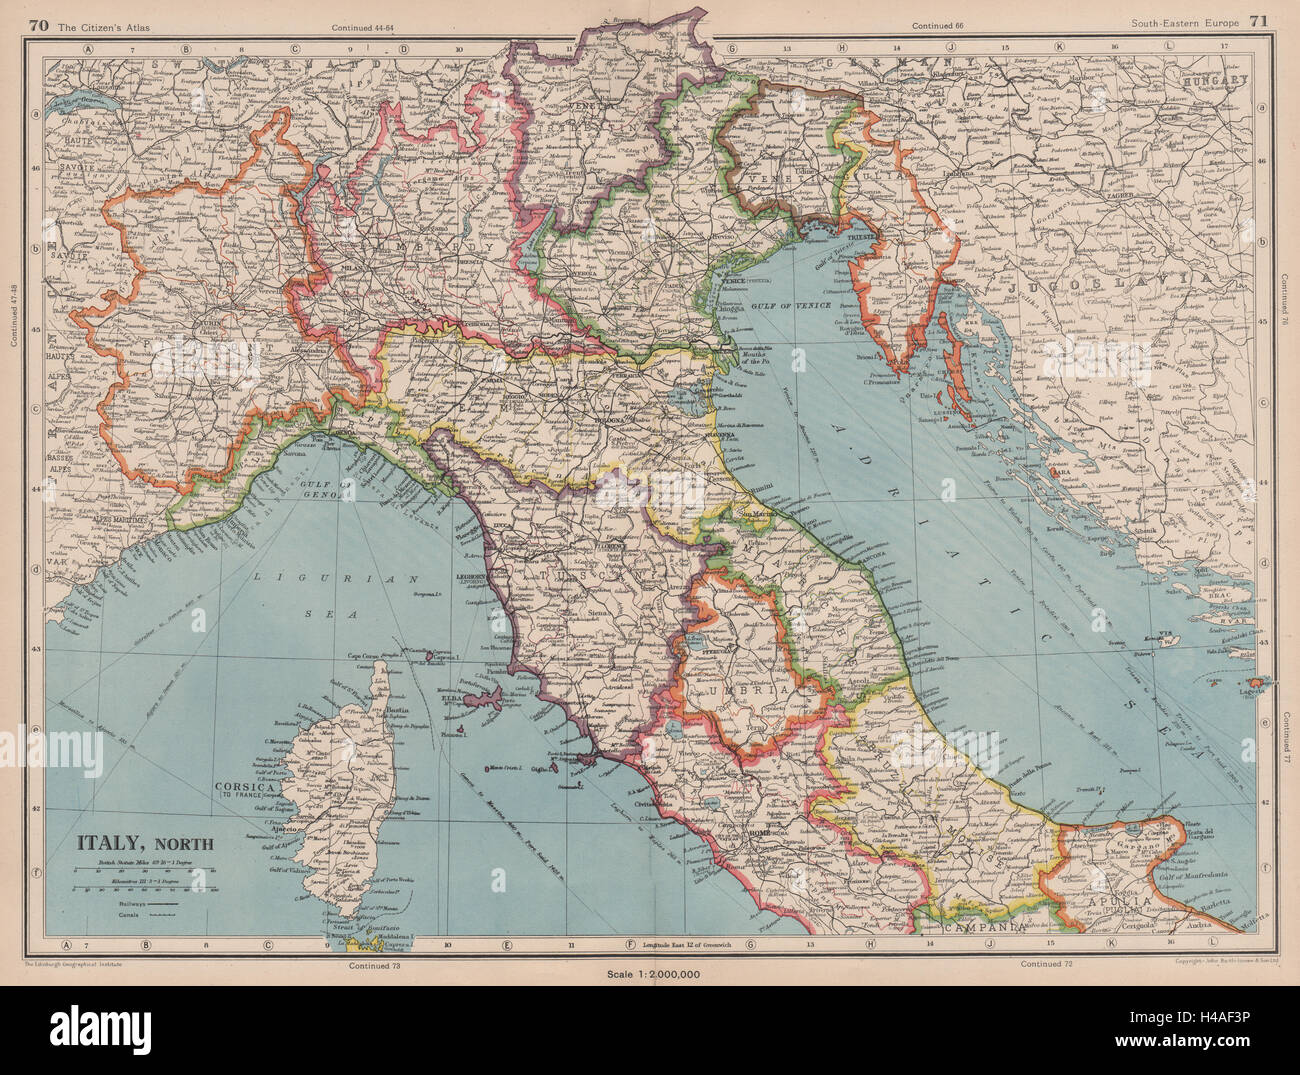 ITALY NORTH. Includes Istria Tende Mt Cenis. Pre-1947 border changes 1944 map Stock Photo